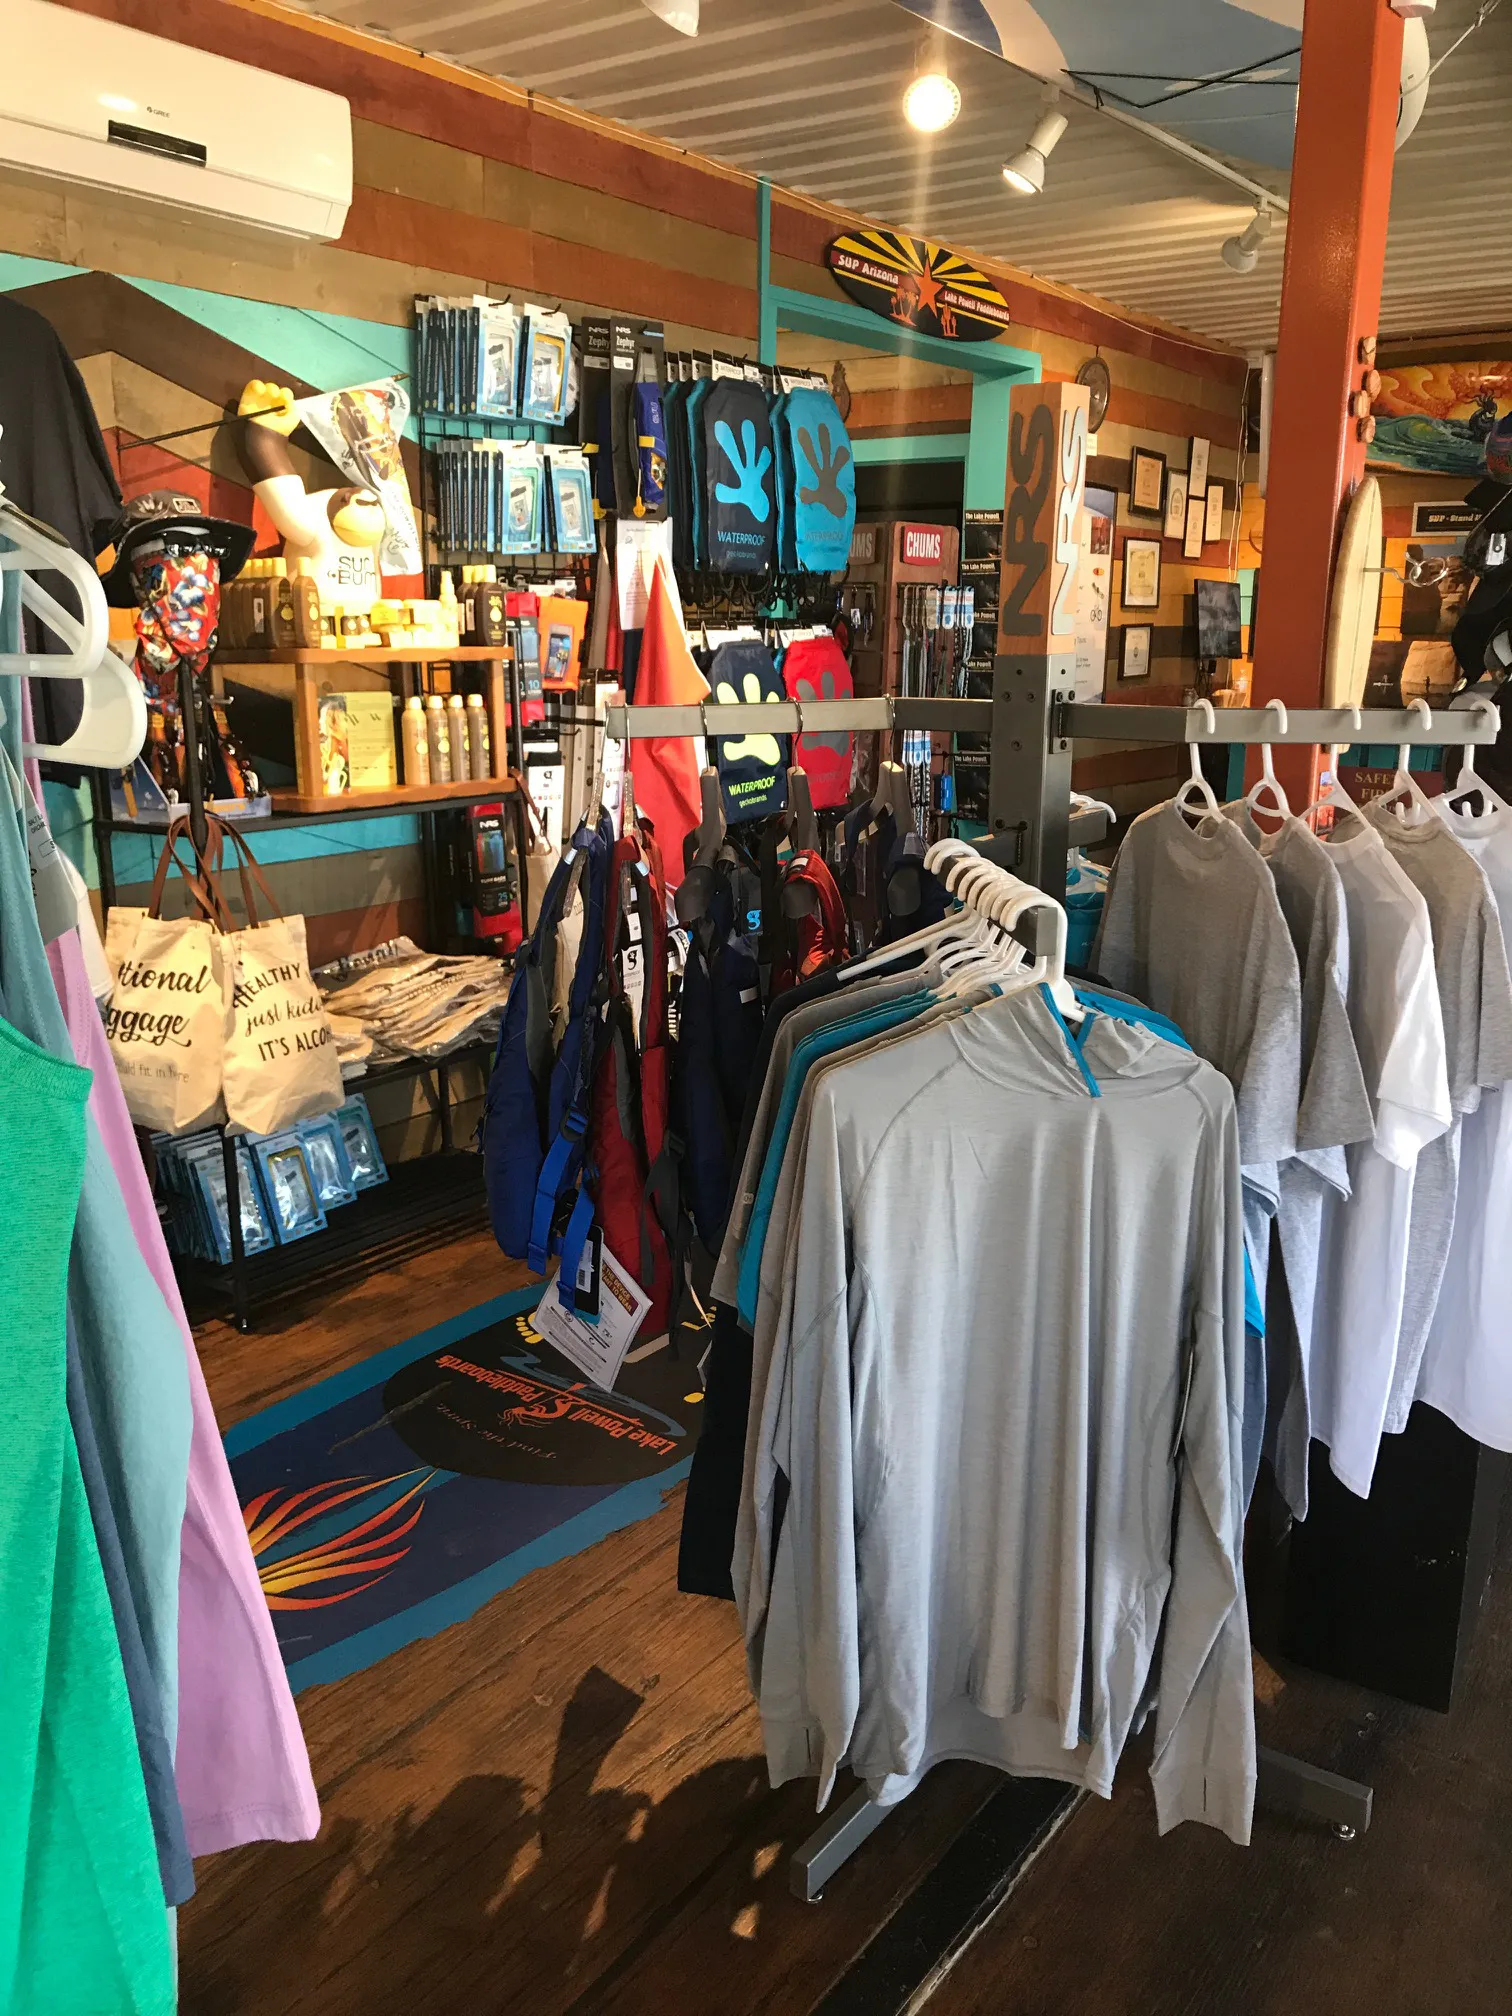 lake powell gift shop with shirts, gear, and many lake powell souvenirs